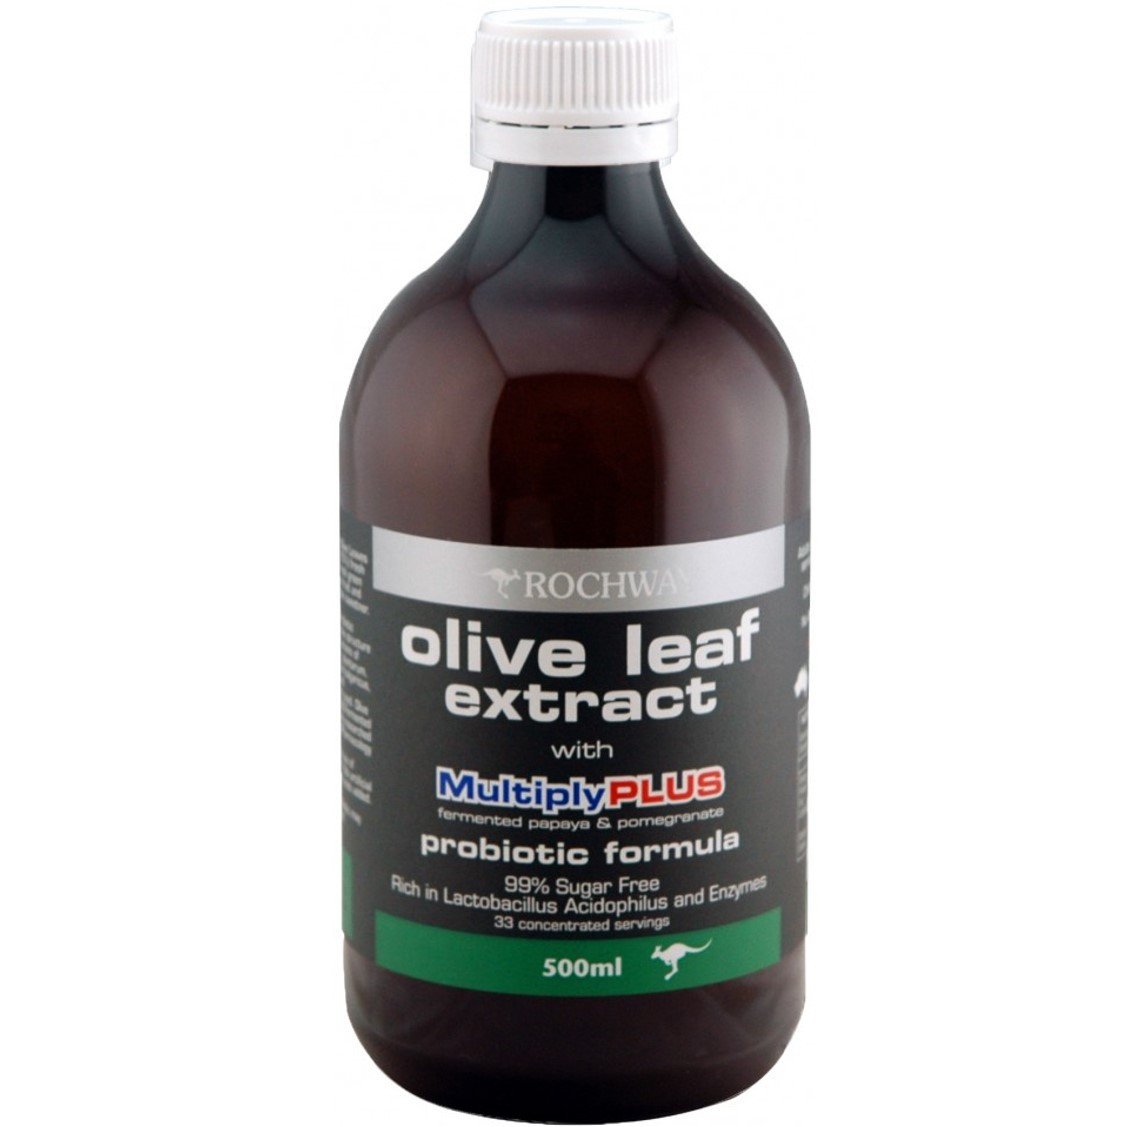 Rochway Olive Leaf Extract with MultiplyPlus, 500ml